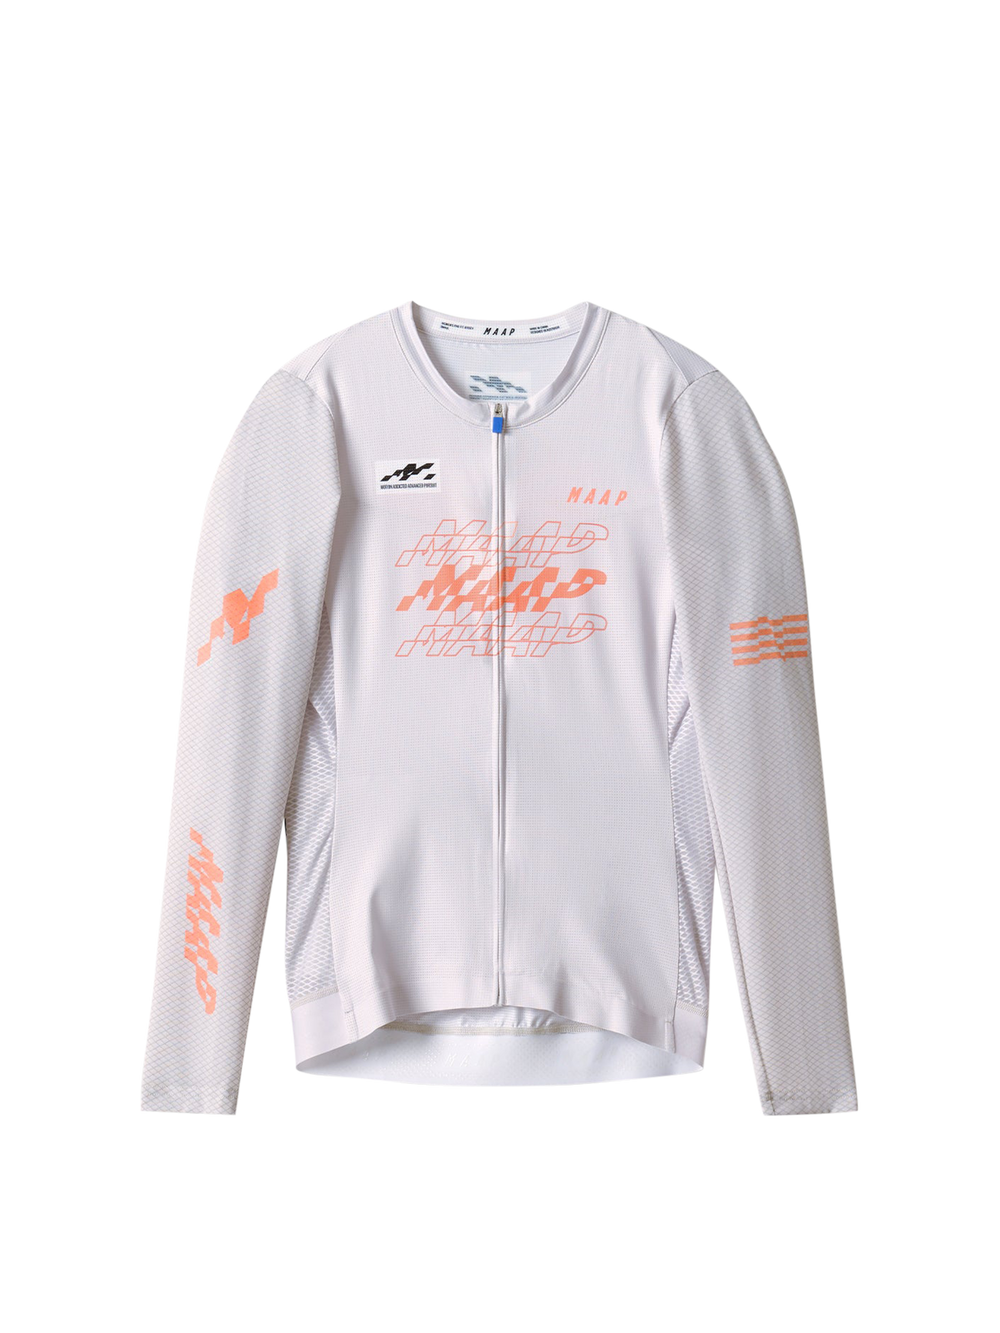 Product Image for Women's Fragment Pro Air LS Jersey 2.0